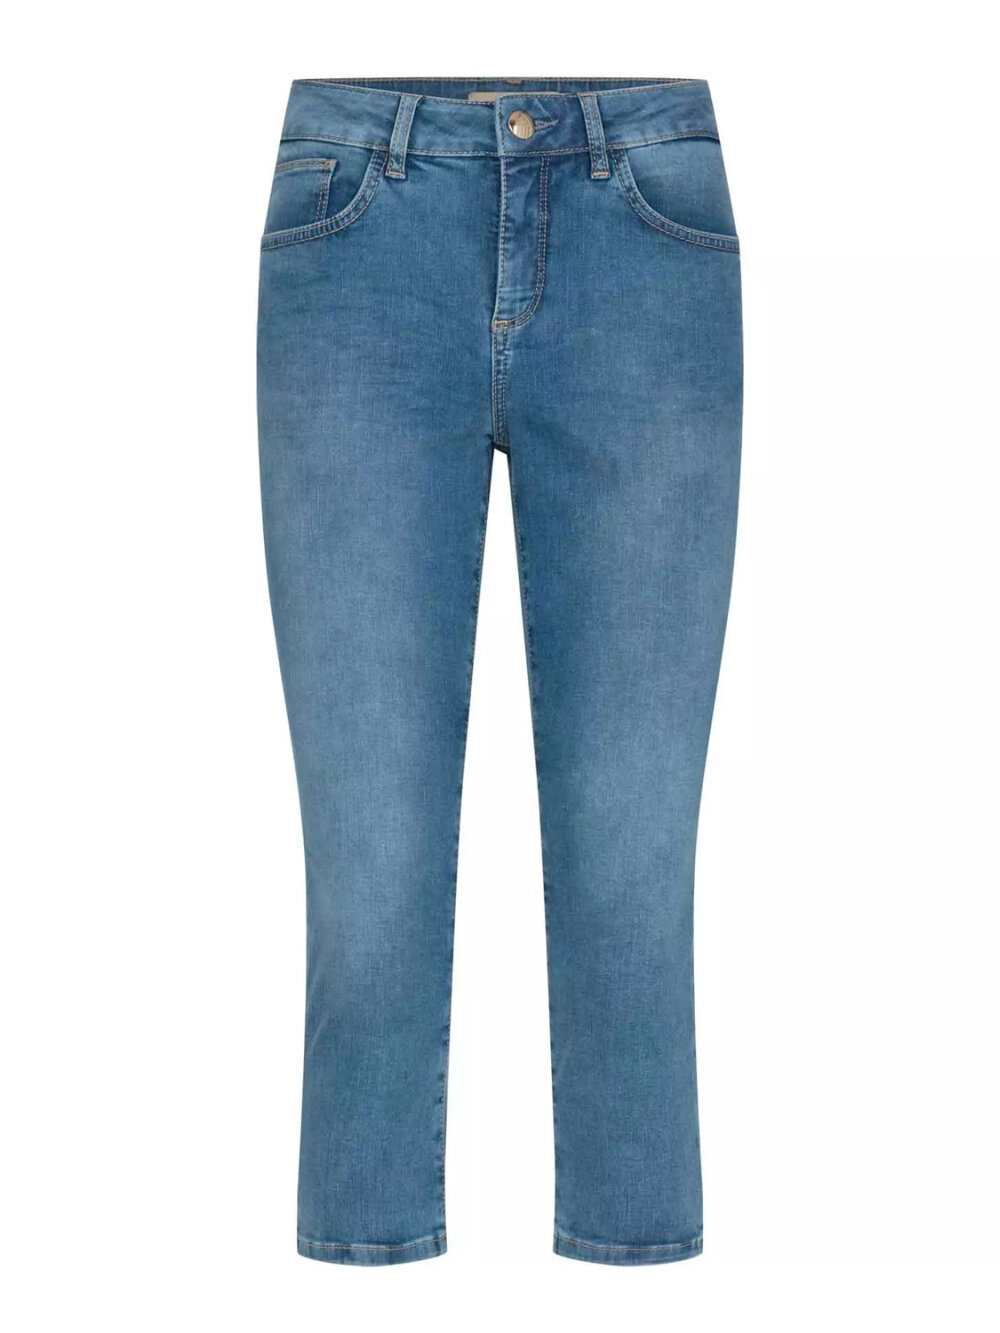 Mos Mosh - Cecilia Reloved LB Jeans